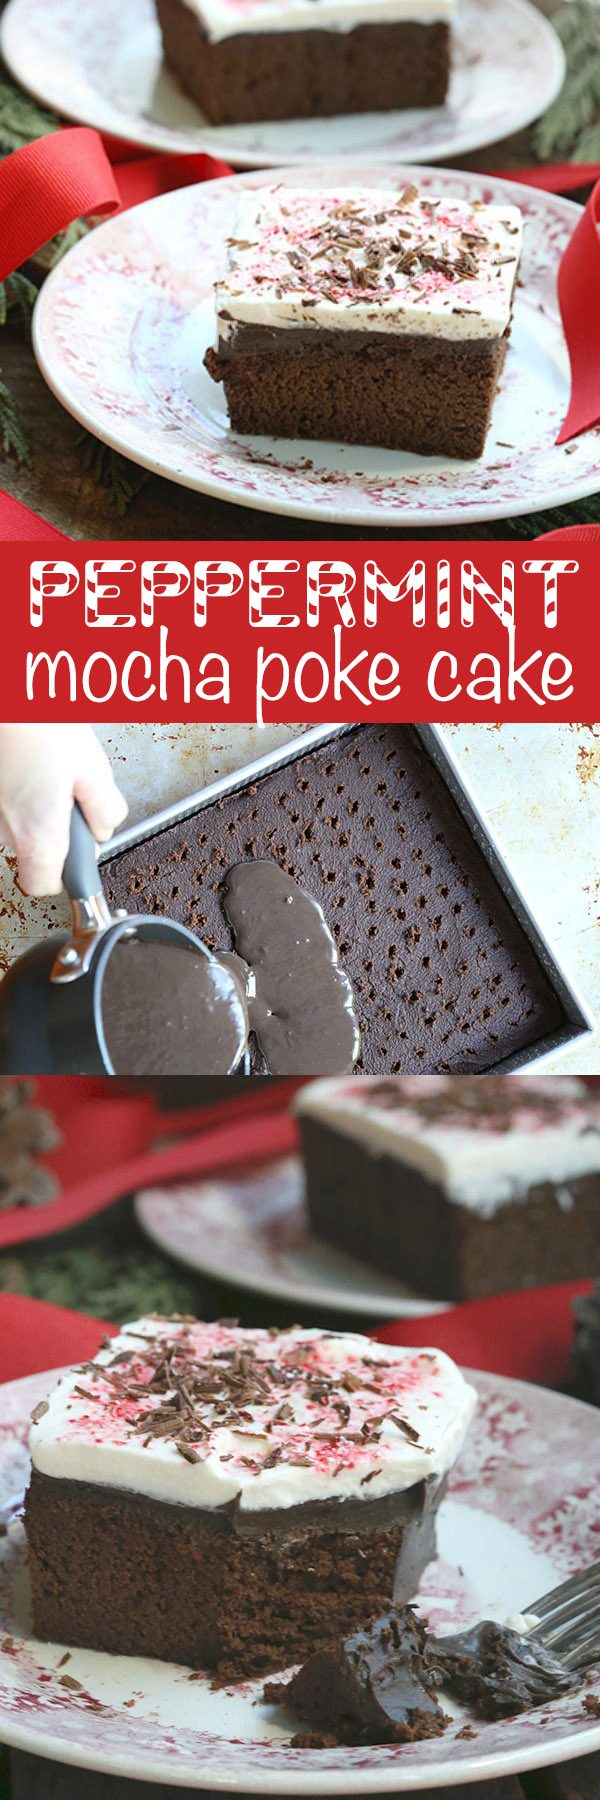 This is the low carb holiday dessert recipe you've been waiting for! Sugar-free, grain-free Chocolate Peppermint Poke Cake